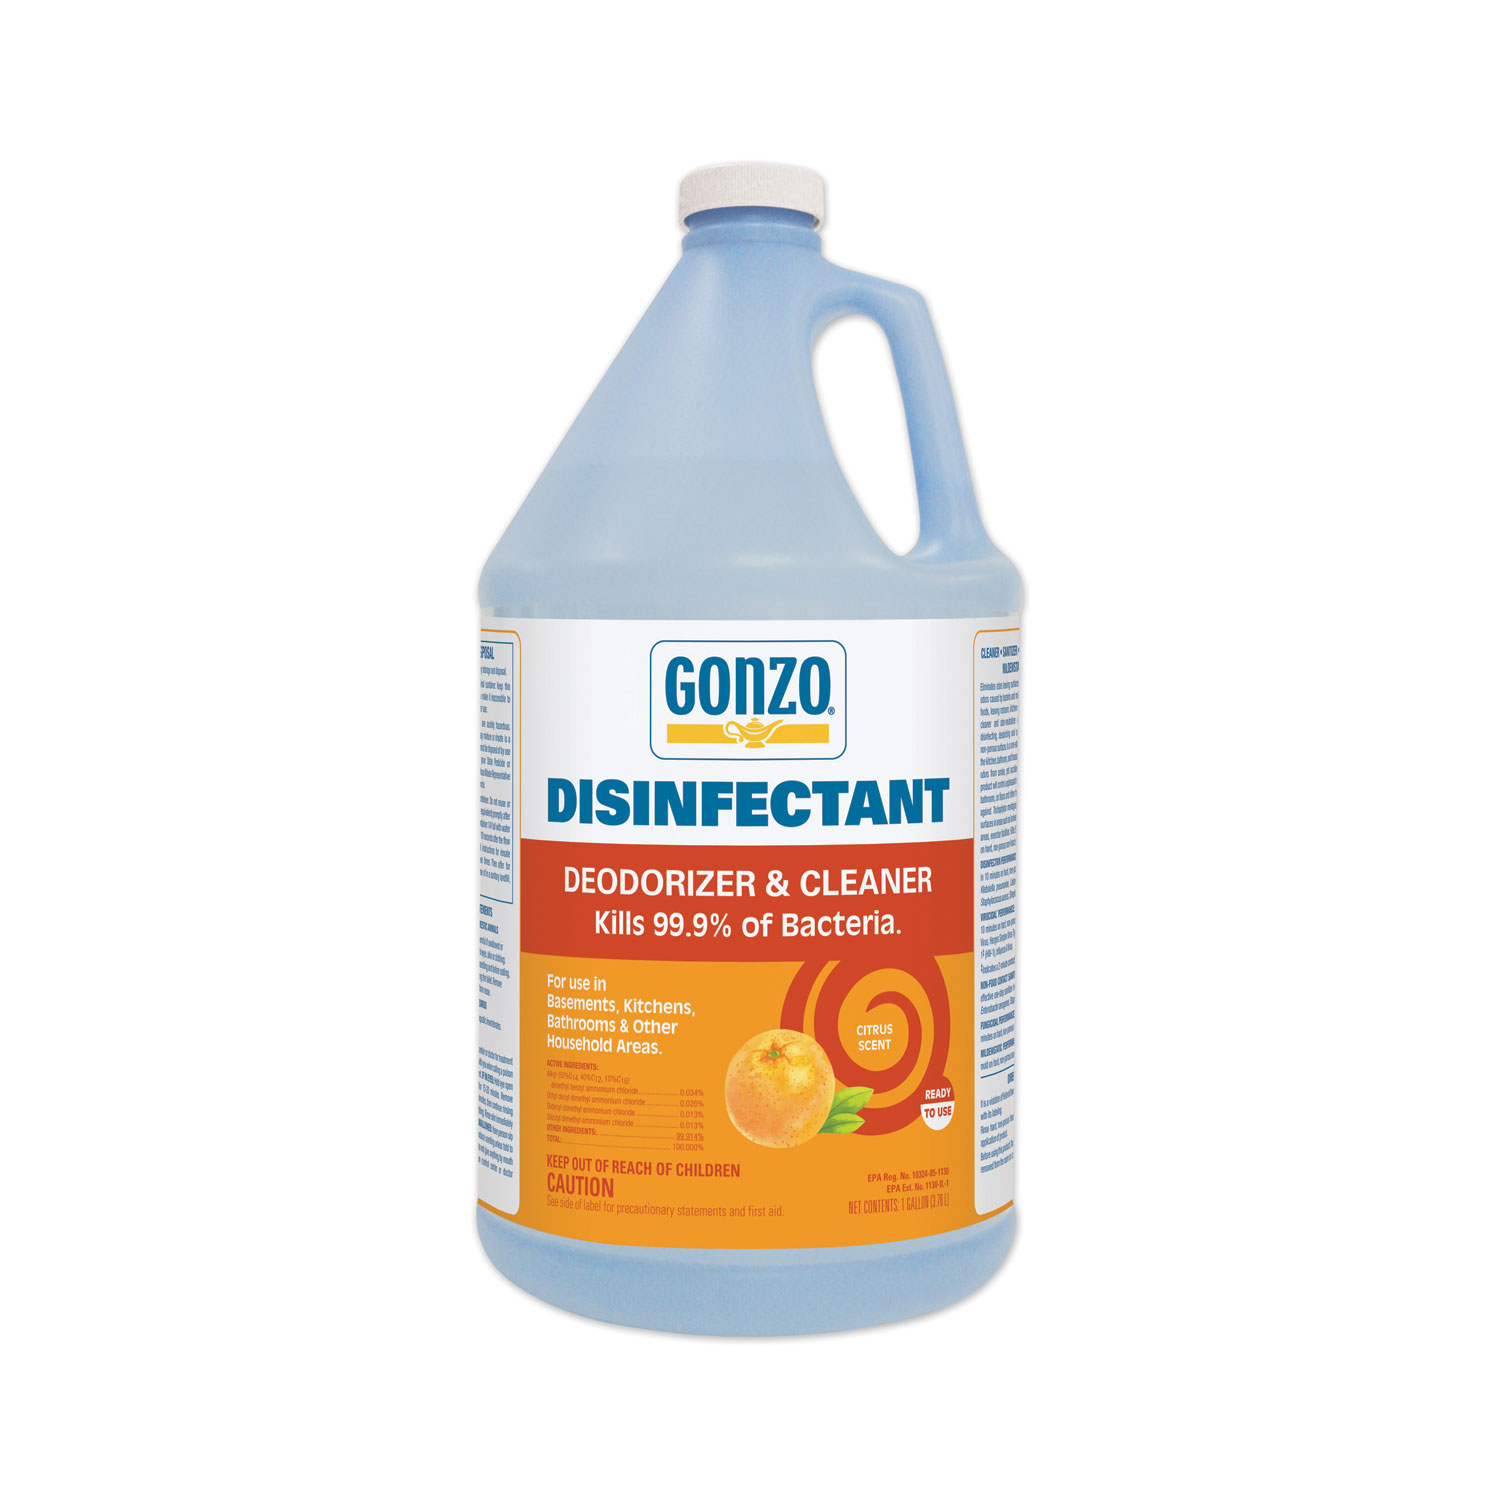  Gonzo WMN1041ACT Disinfectant Deodorizer and Cleaner, Citrus Scent, 1 gal Bottle, 4/Carton (WMN1041ACT) 